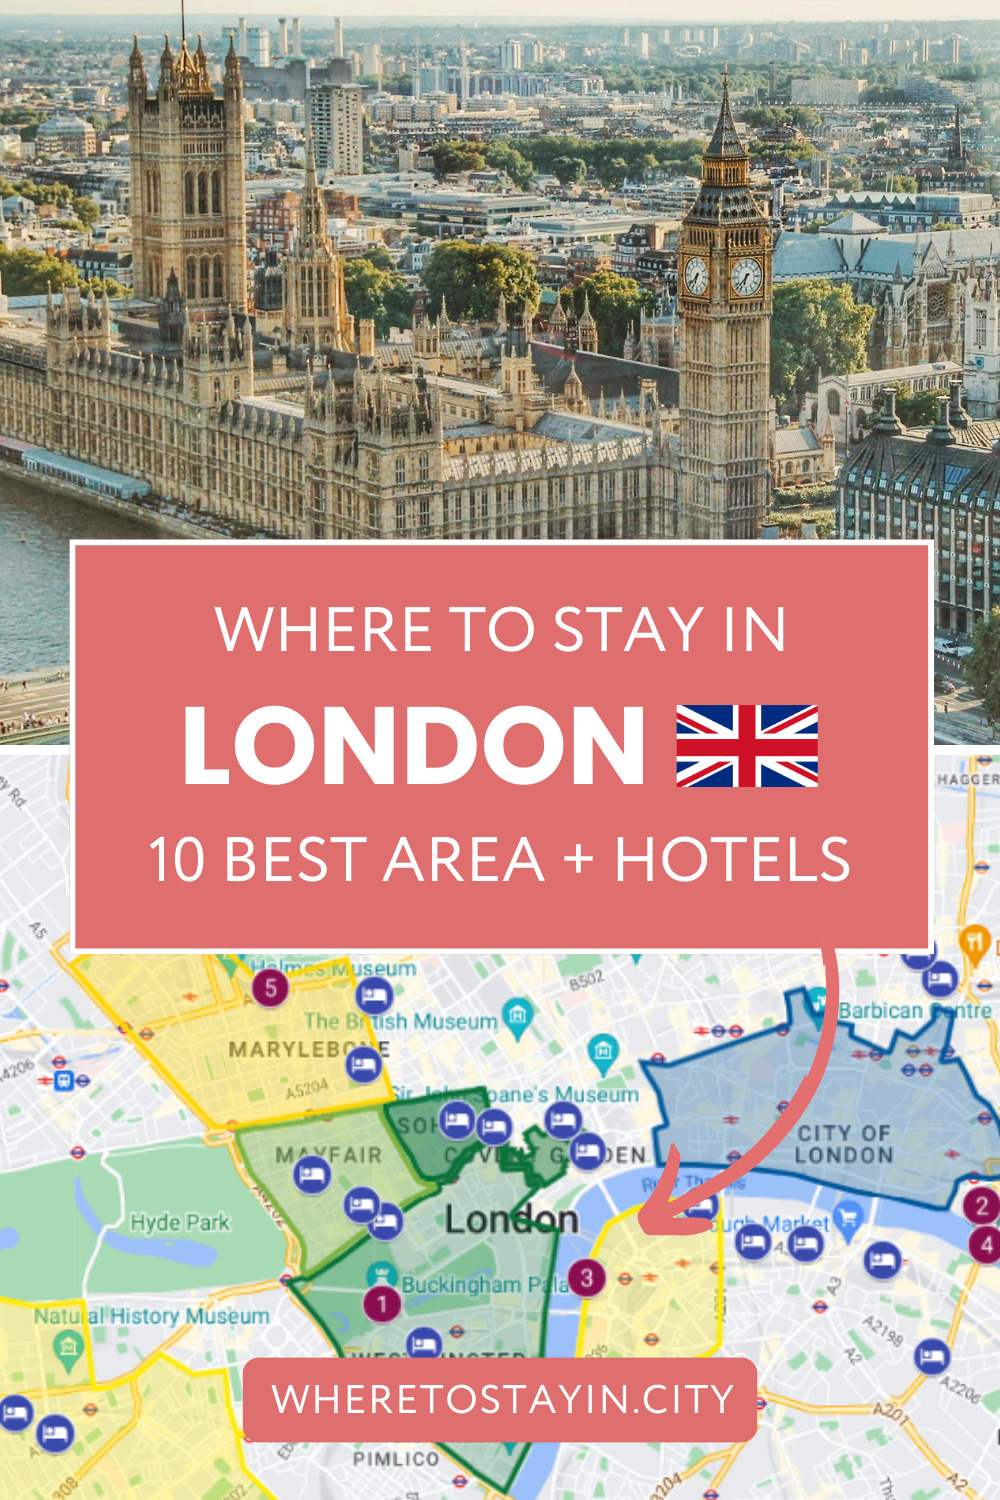 Where to Stay in London 🇬🇧: Best Areas, Neighborhoods & Hotels to Stay